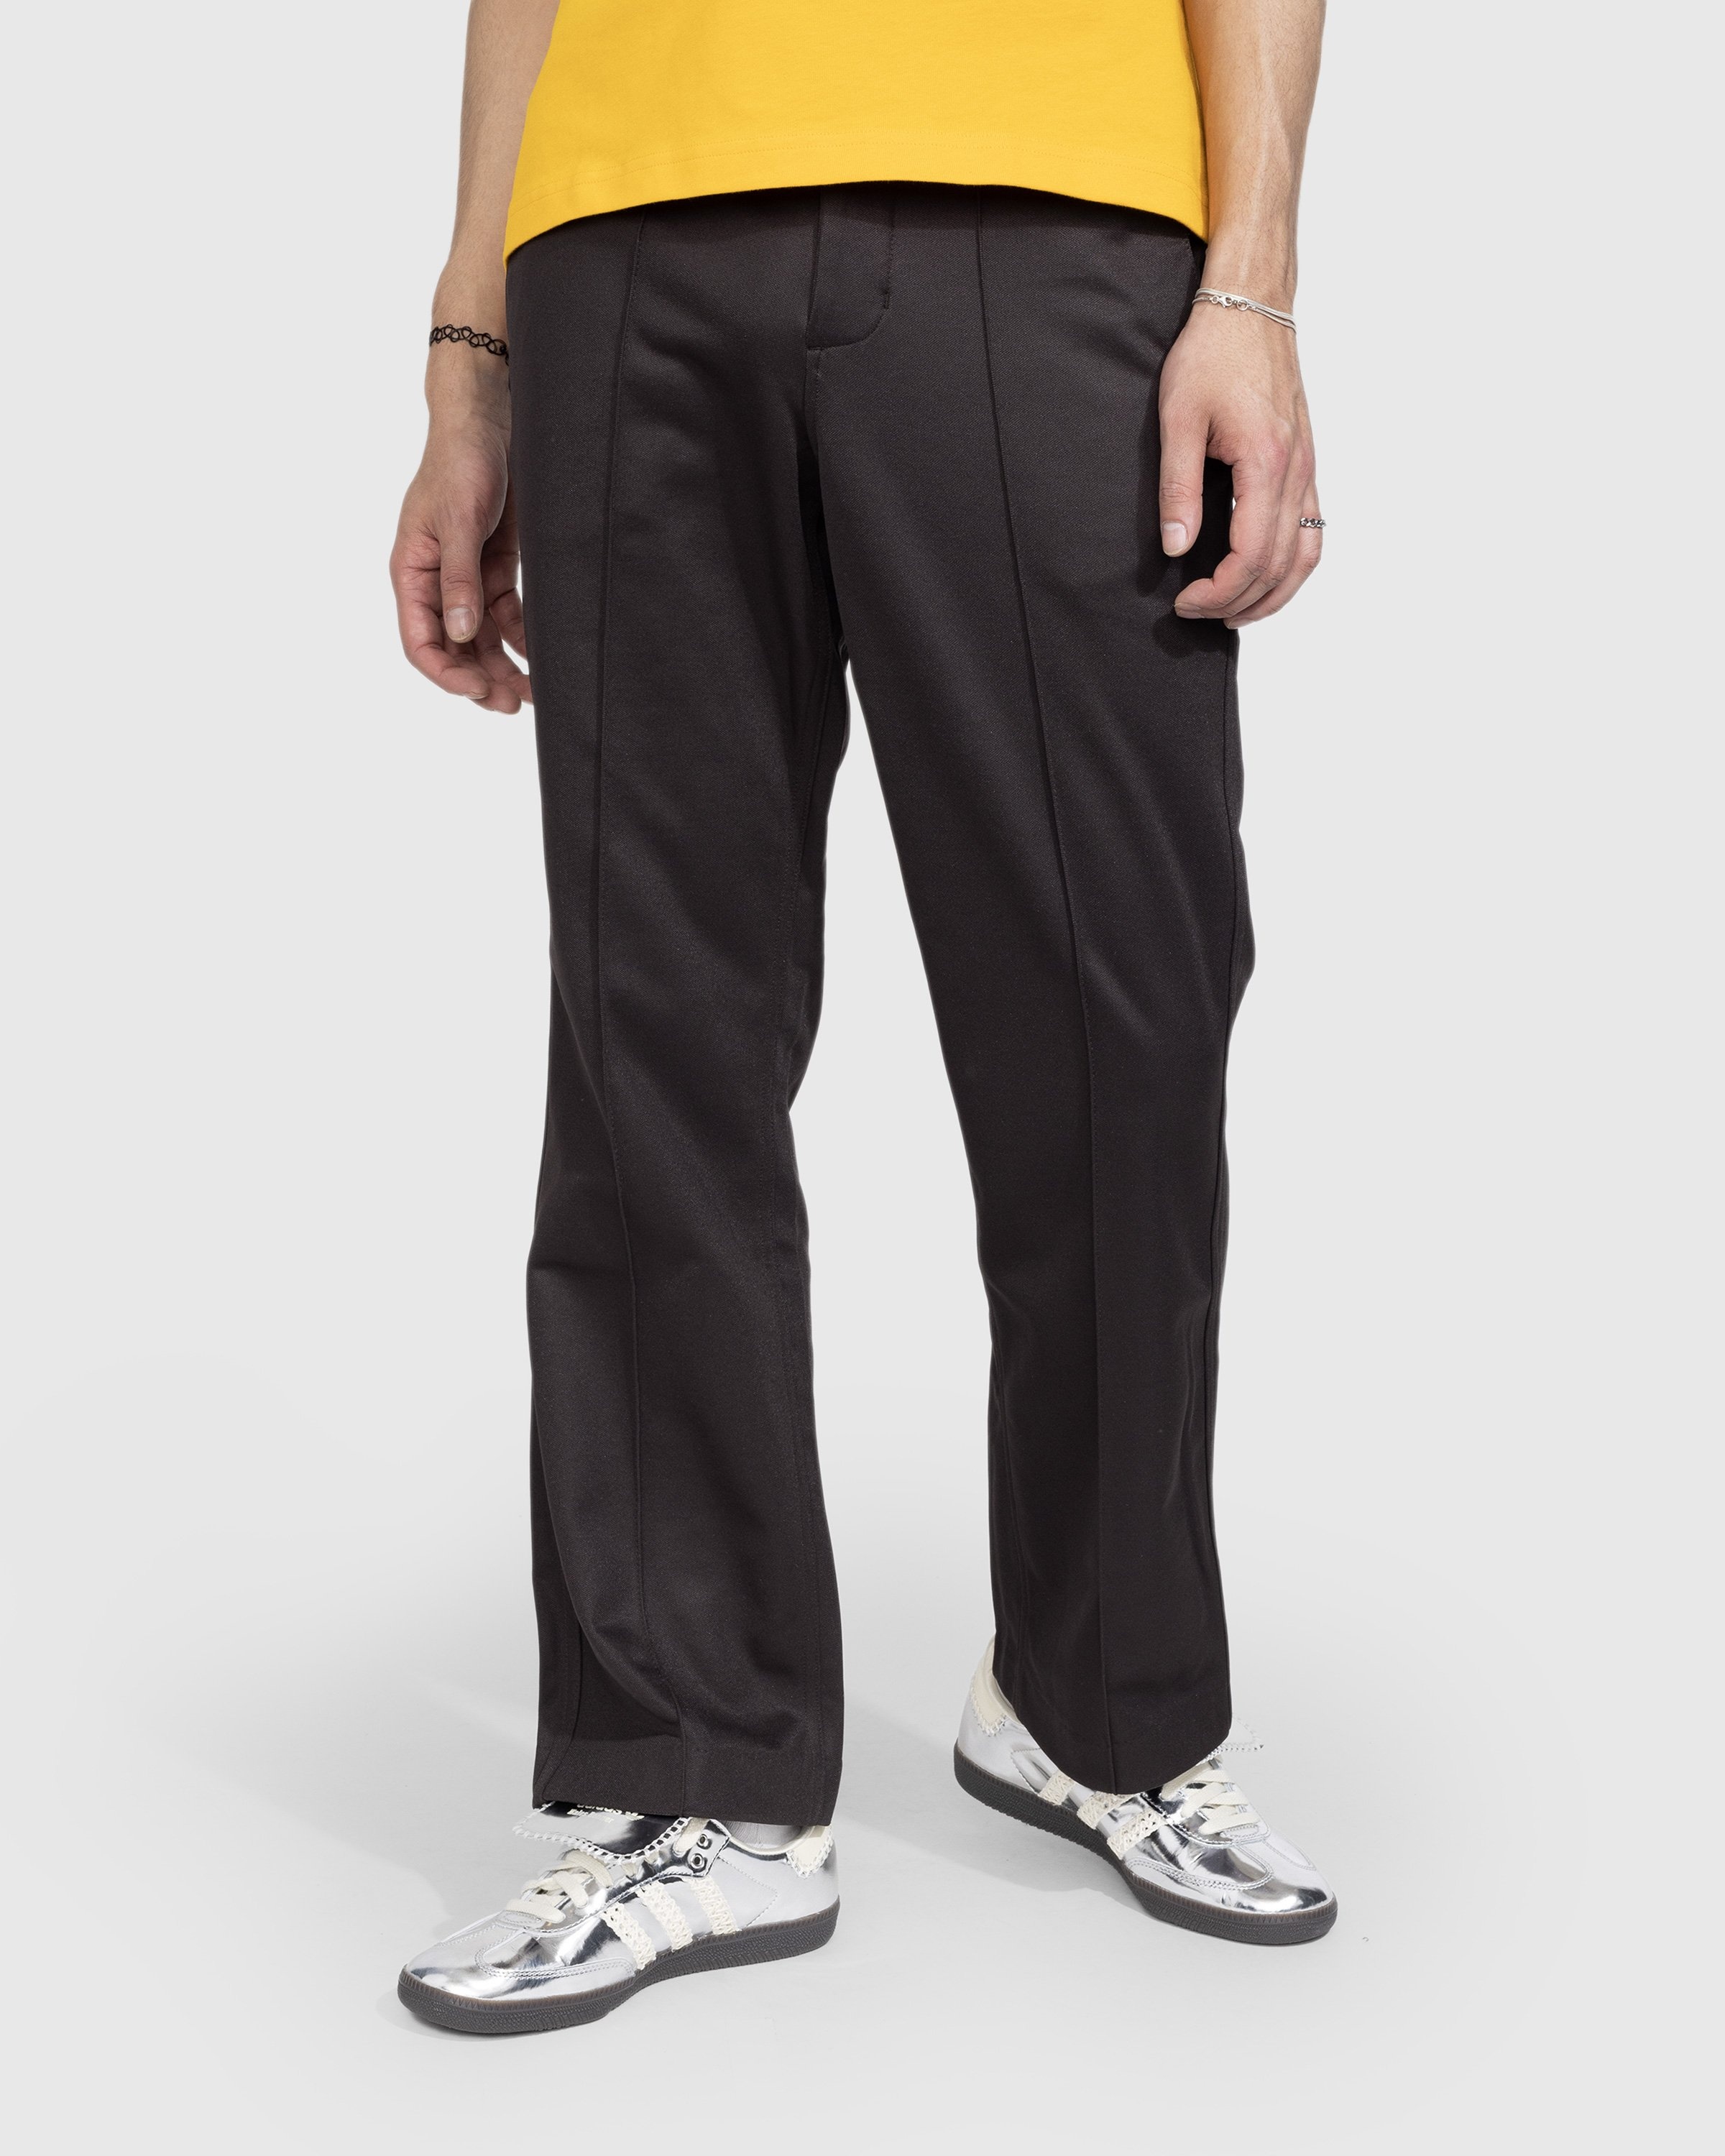 Adidas x Wales Bonner – Flared Trousers Night Brown - Pants - Brown - Image 2